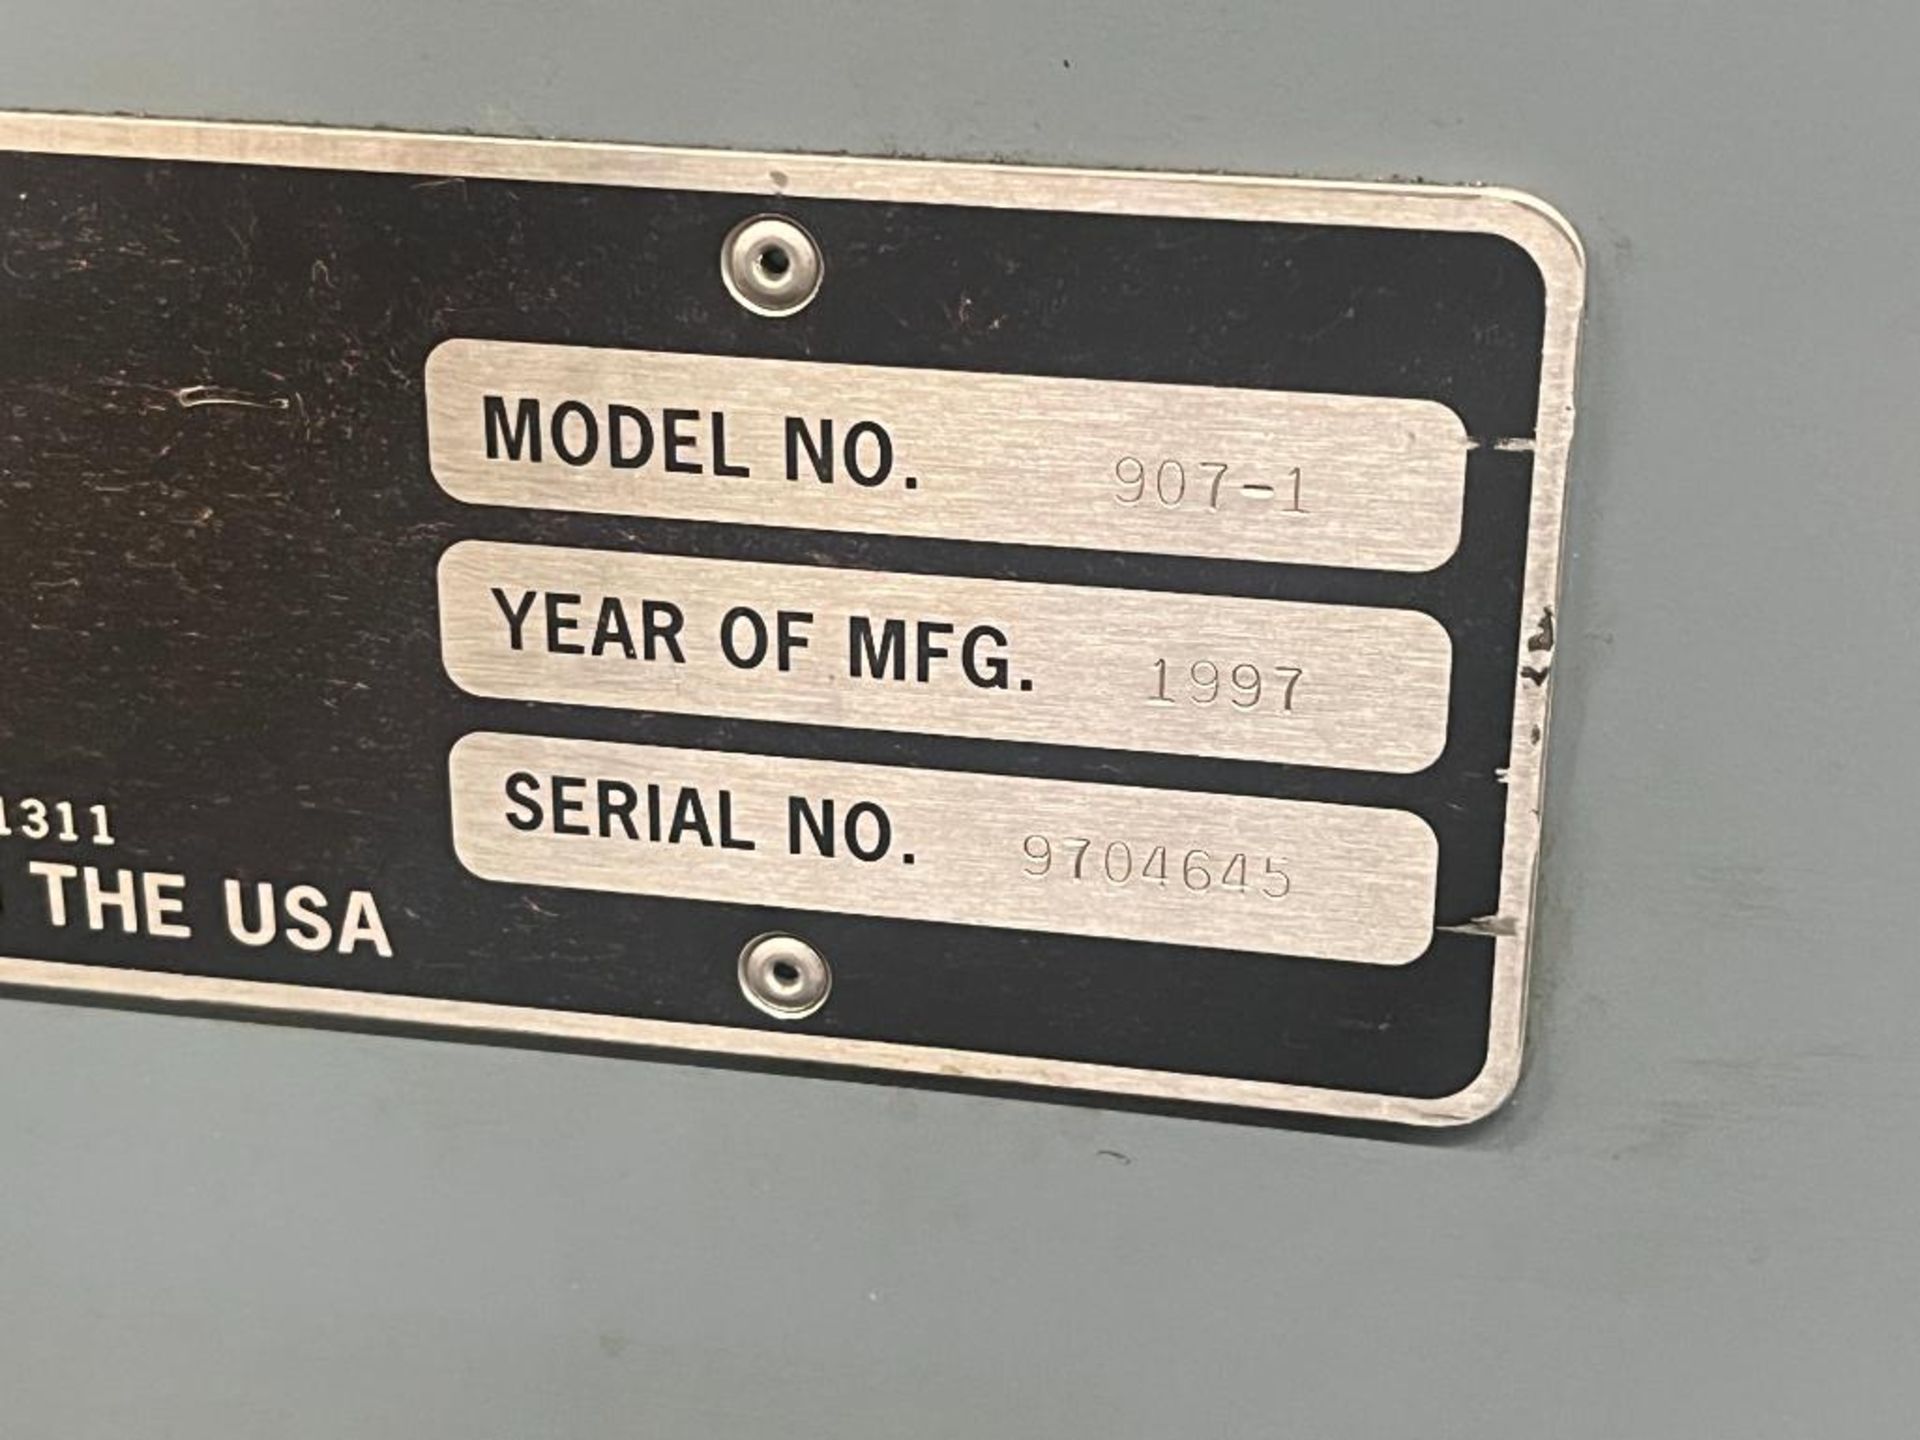 Fadal CNC Vertical Machining Center Model Model 907-1 VMC 6030HT, S/N 9704645 (1997) with Fadal CNC8 - Image 19 of 33